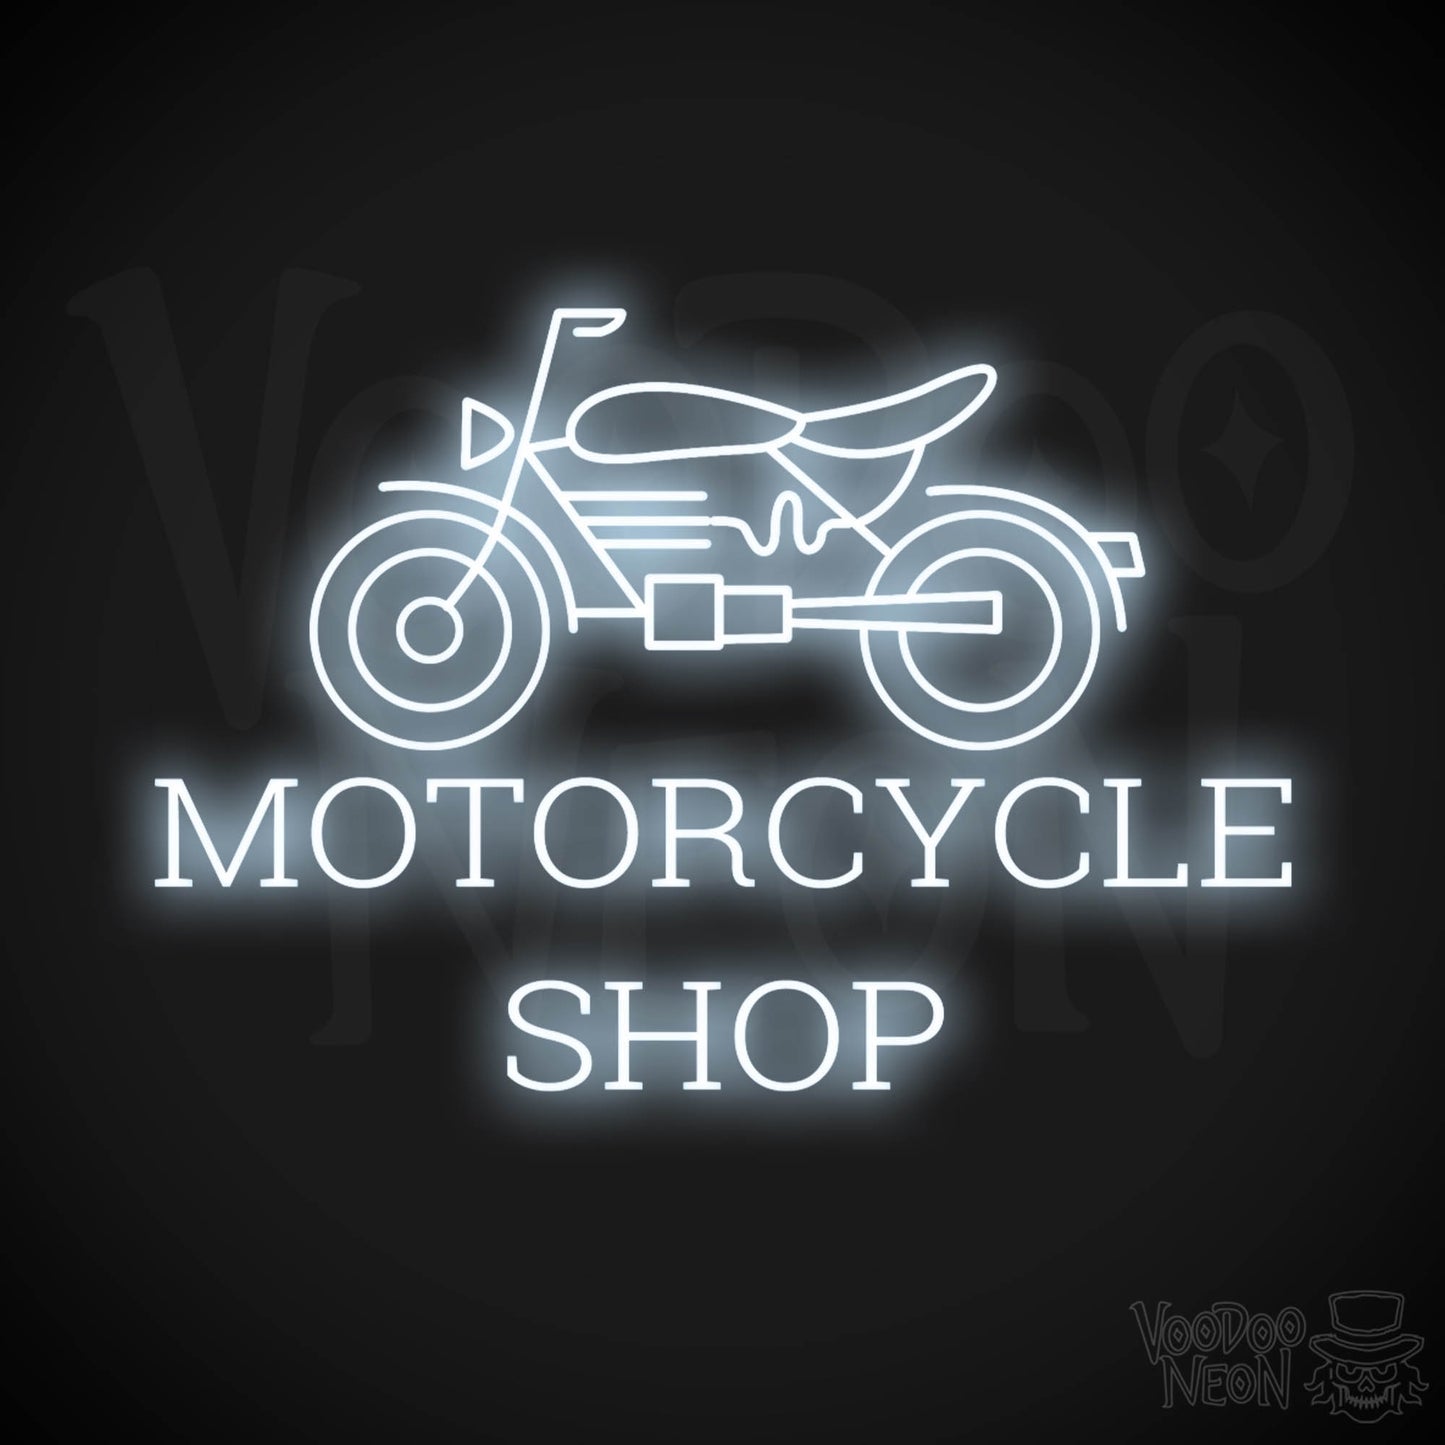 Motorcycle Shop LED Neon - Cool White